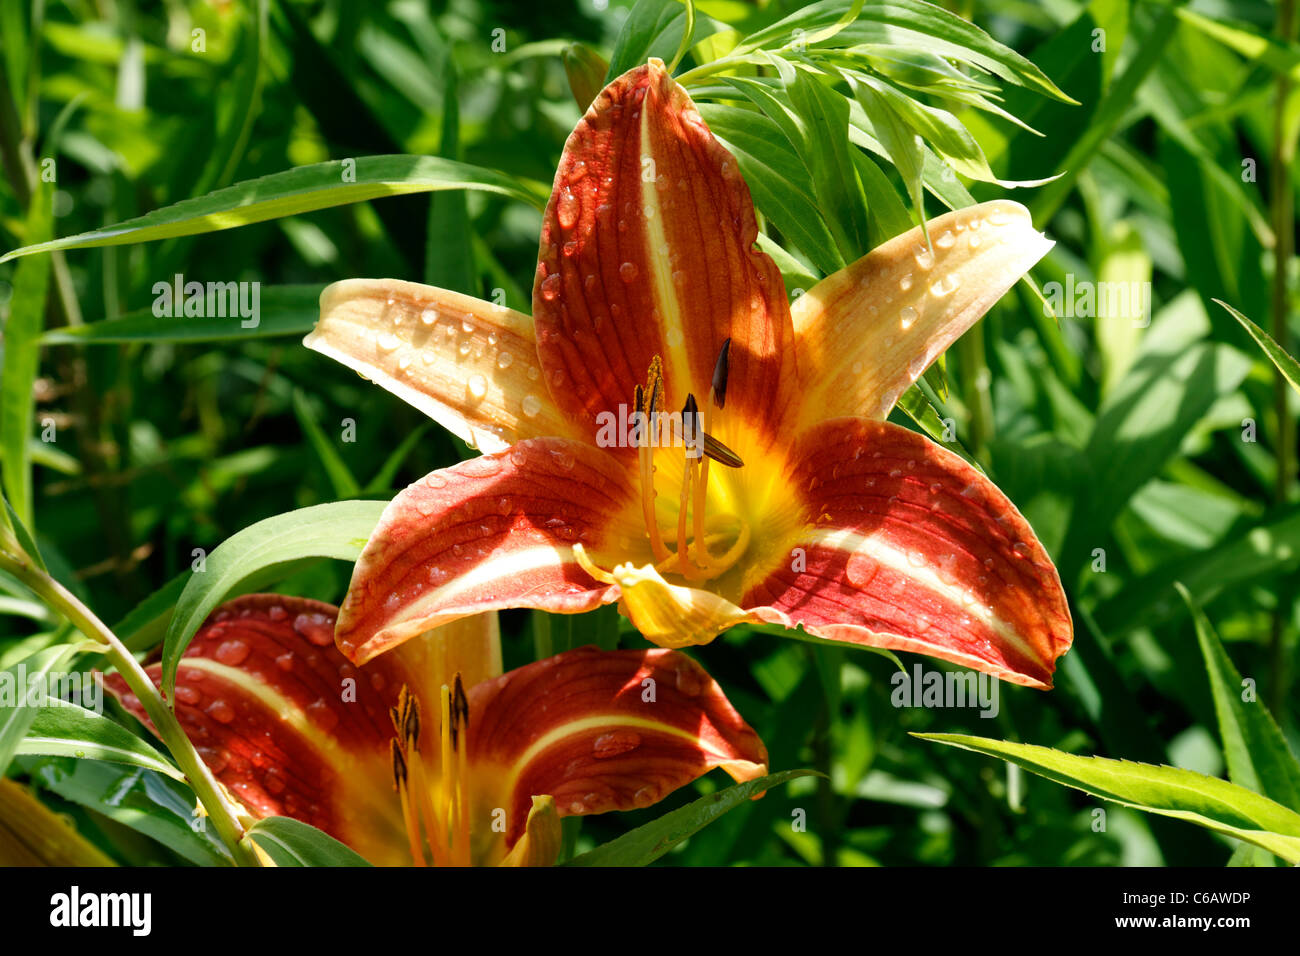 Day lily flower, yellow and red flower, perennial plant (Hemerocallis). Stock Photo